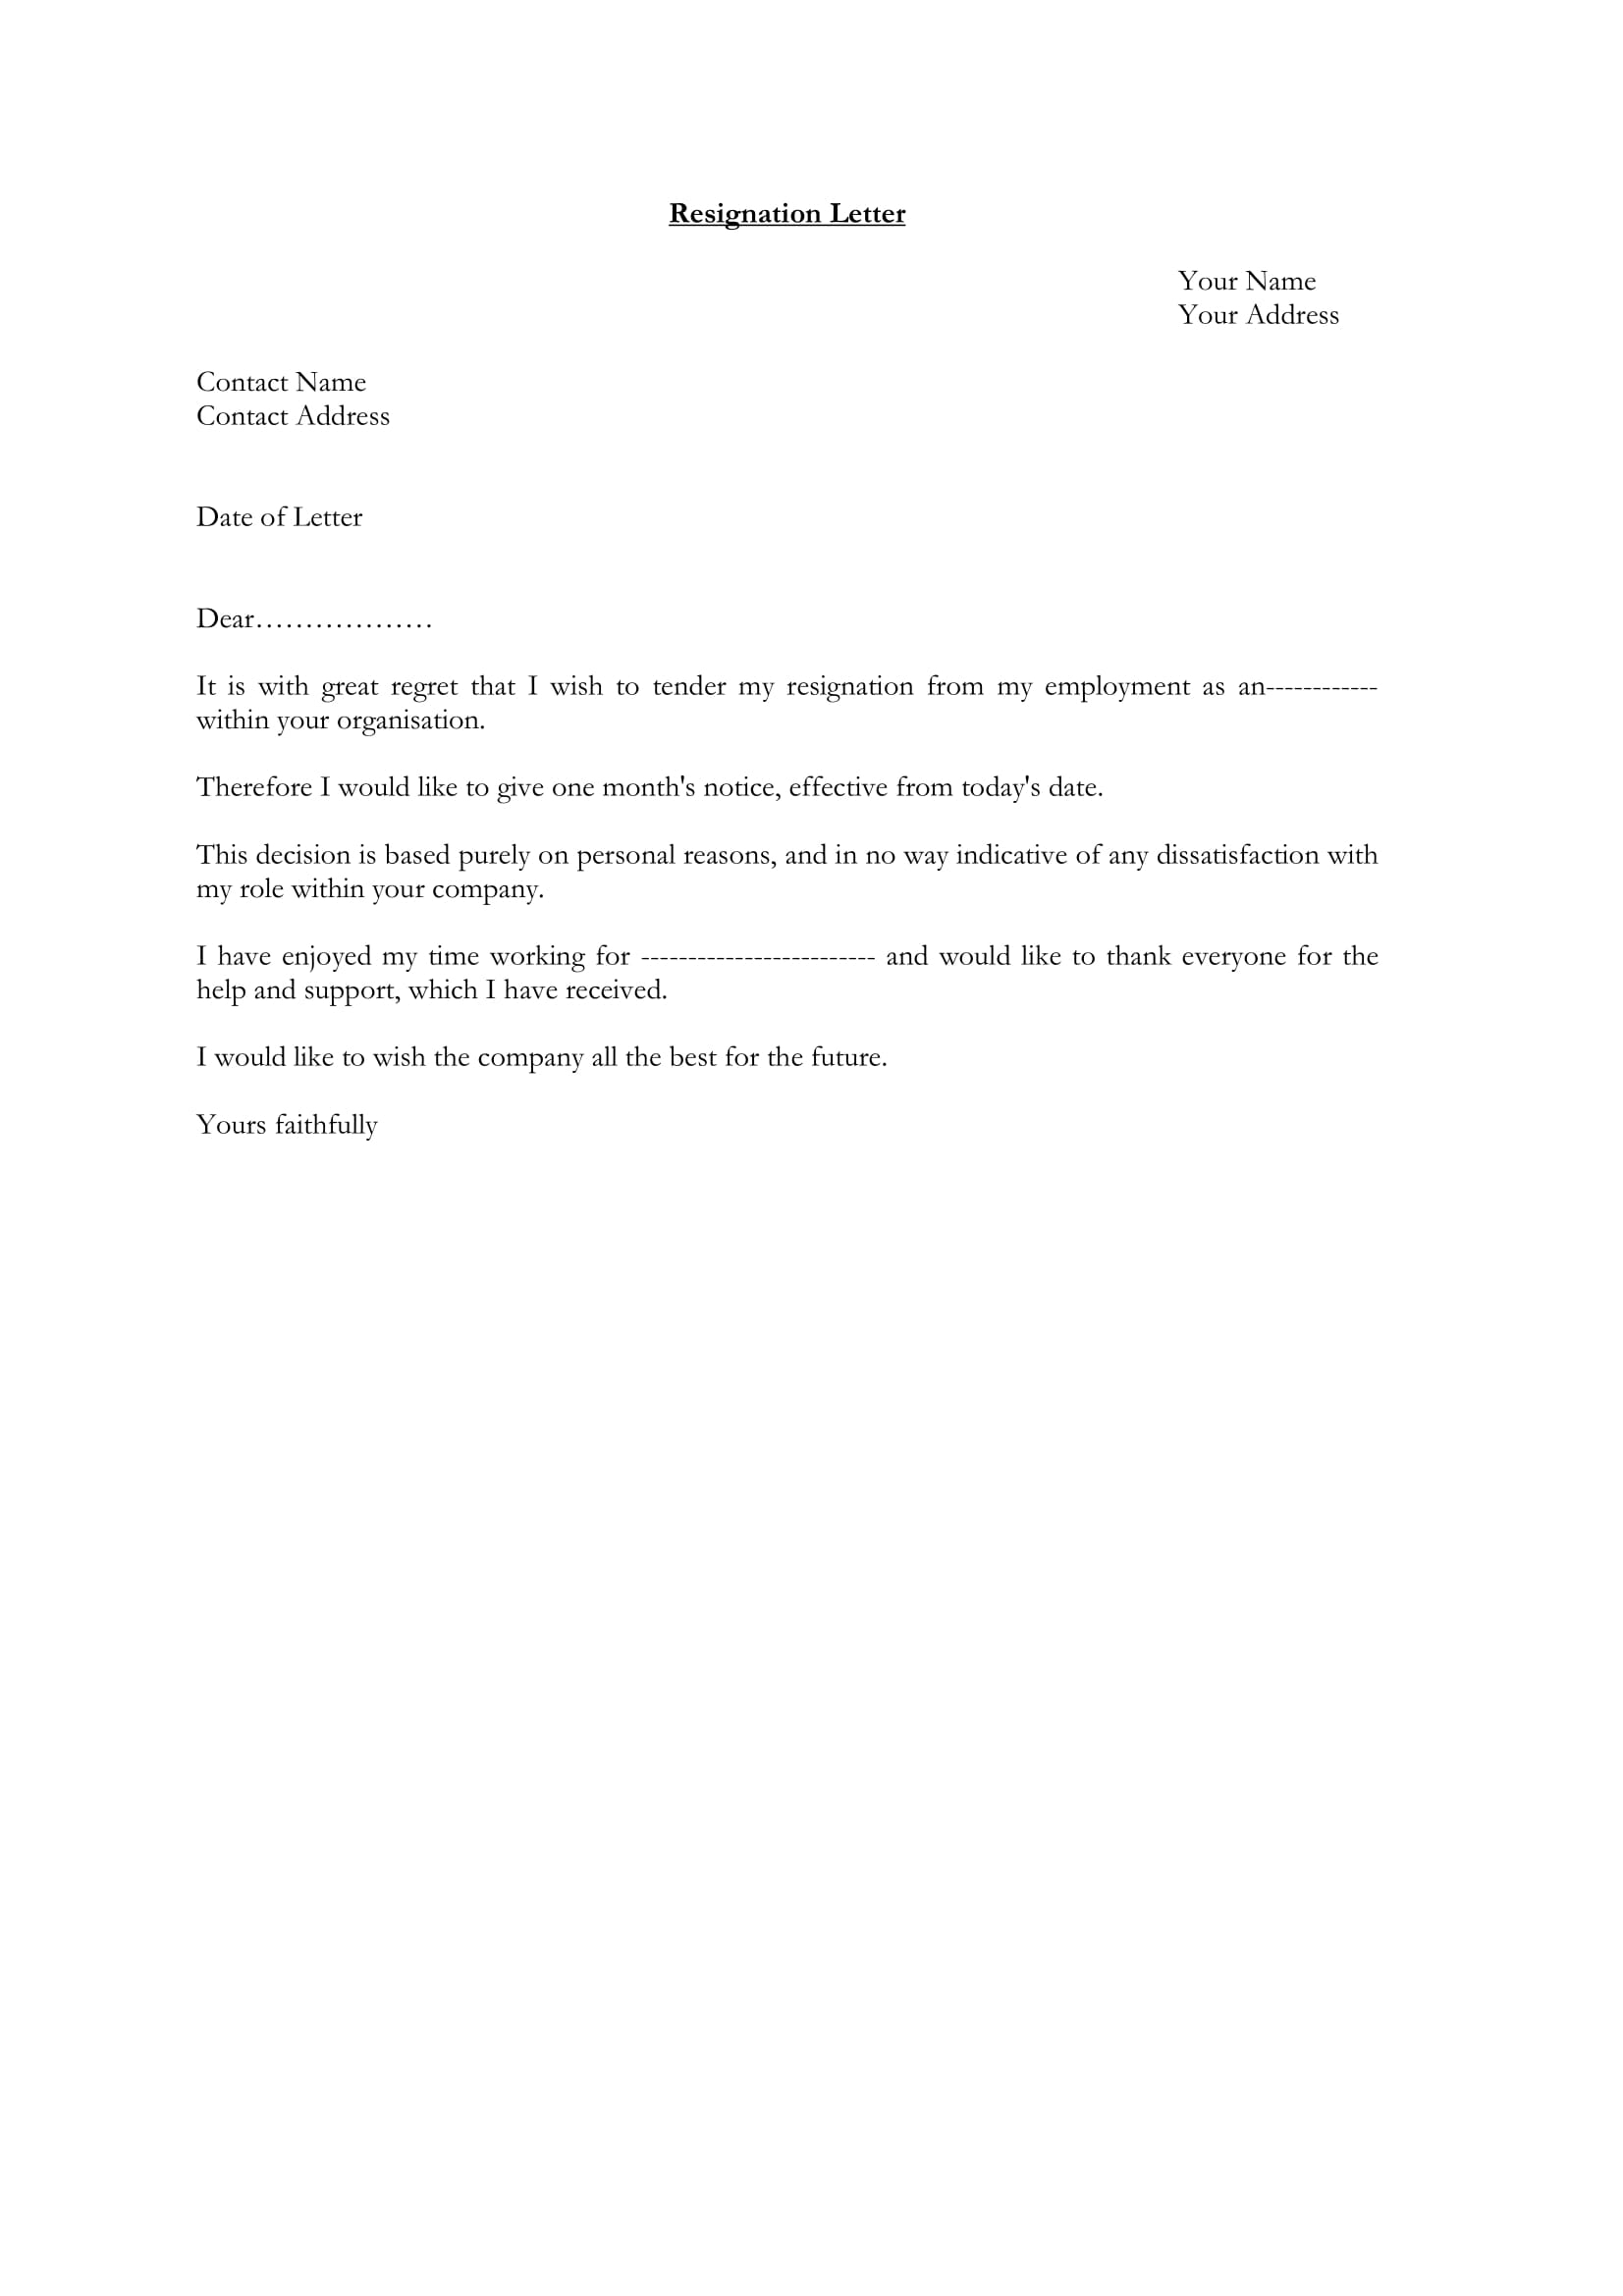 19 simple resignation letter examples pdf word